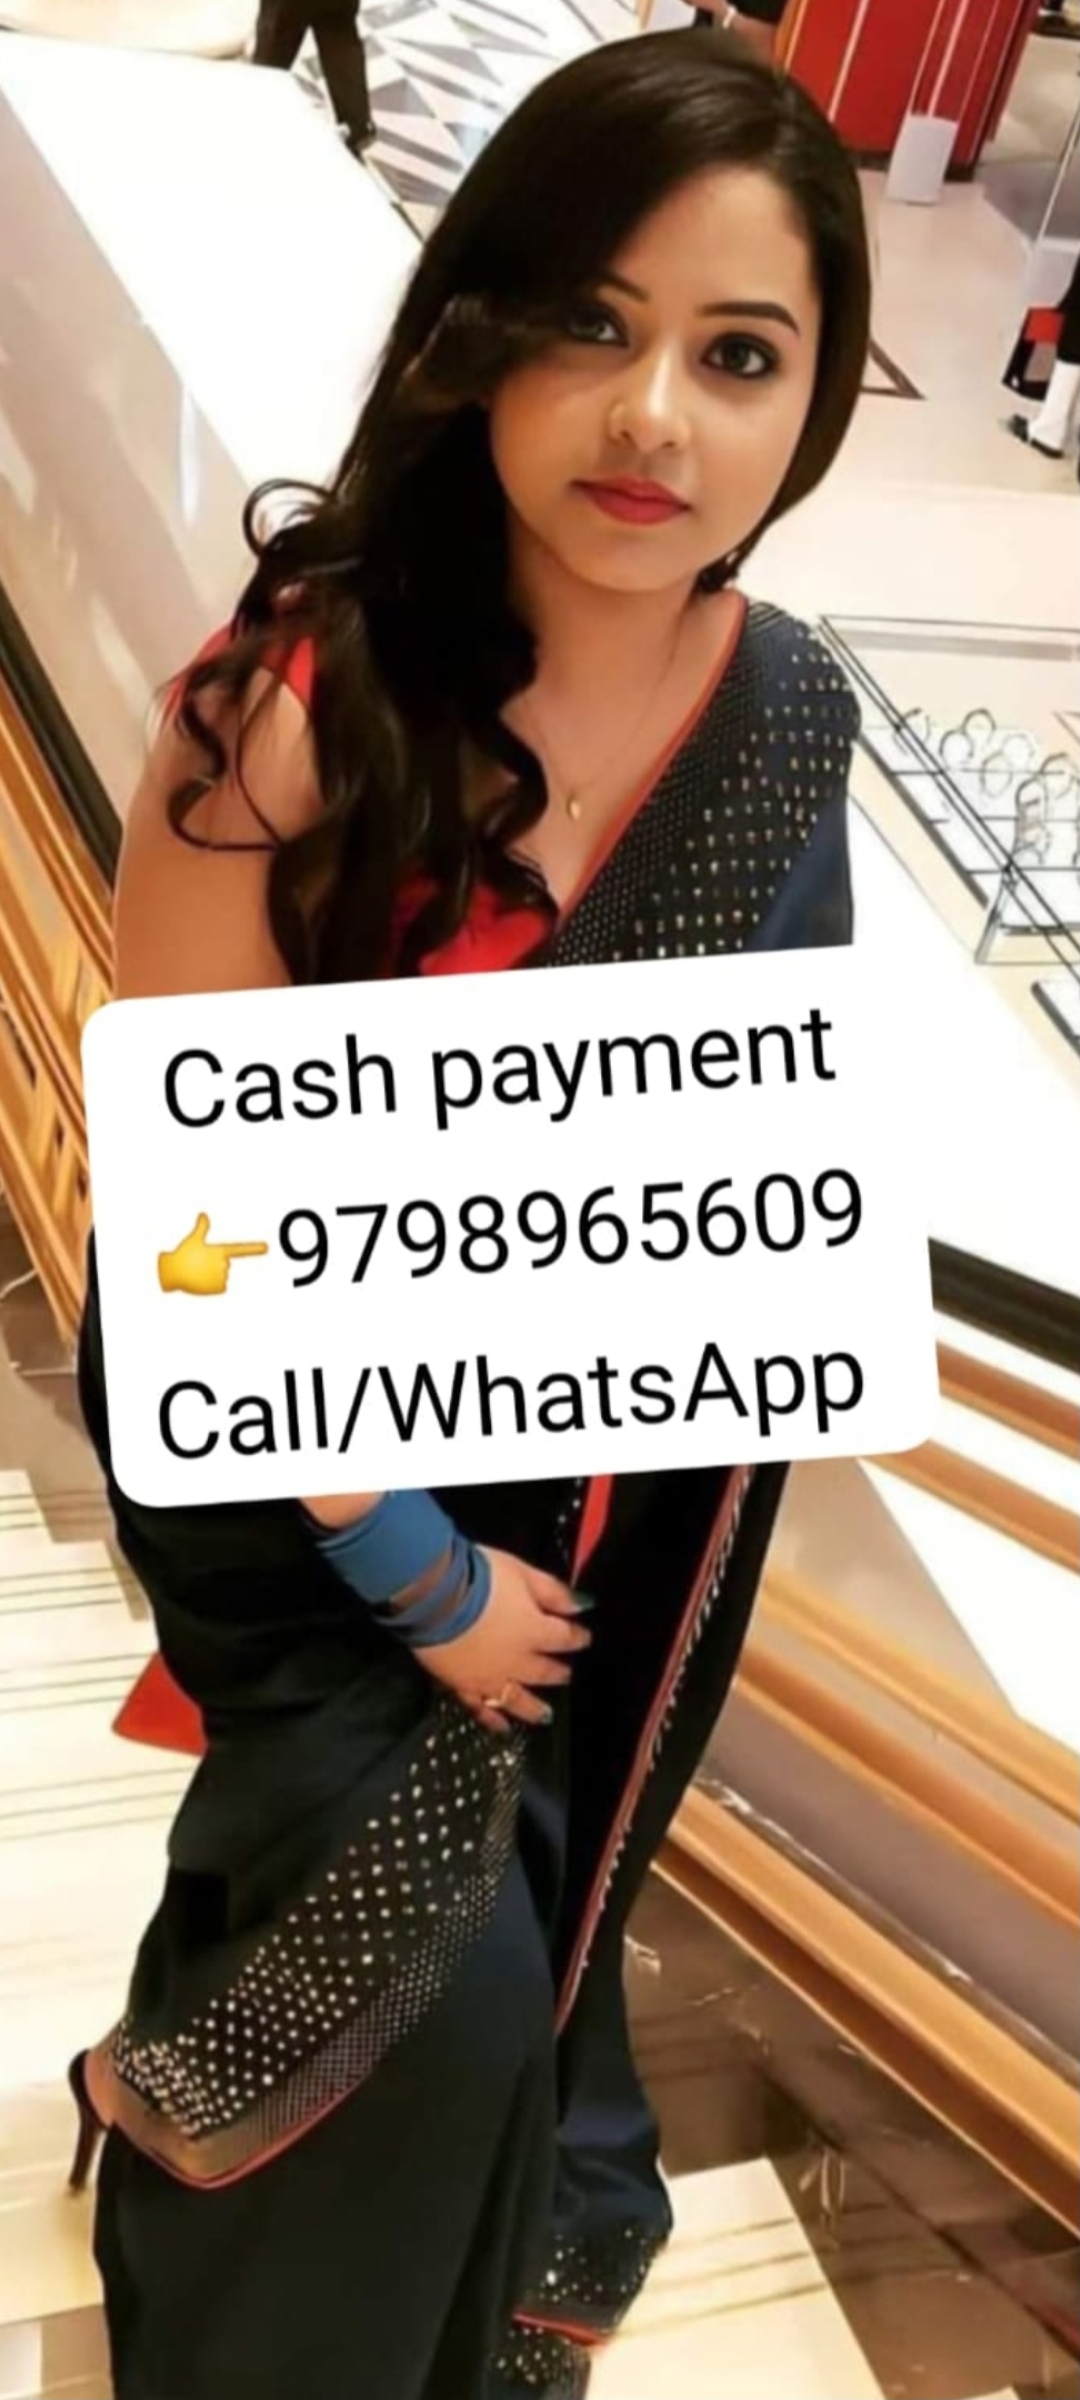 Baranagar in VIP model college girl anytime available service 